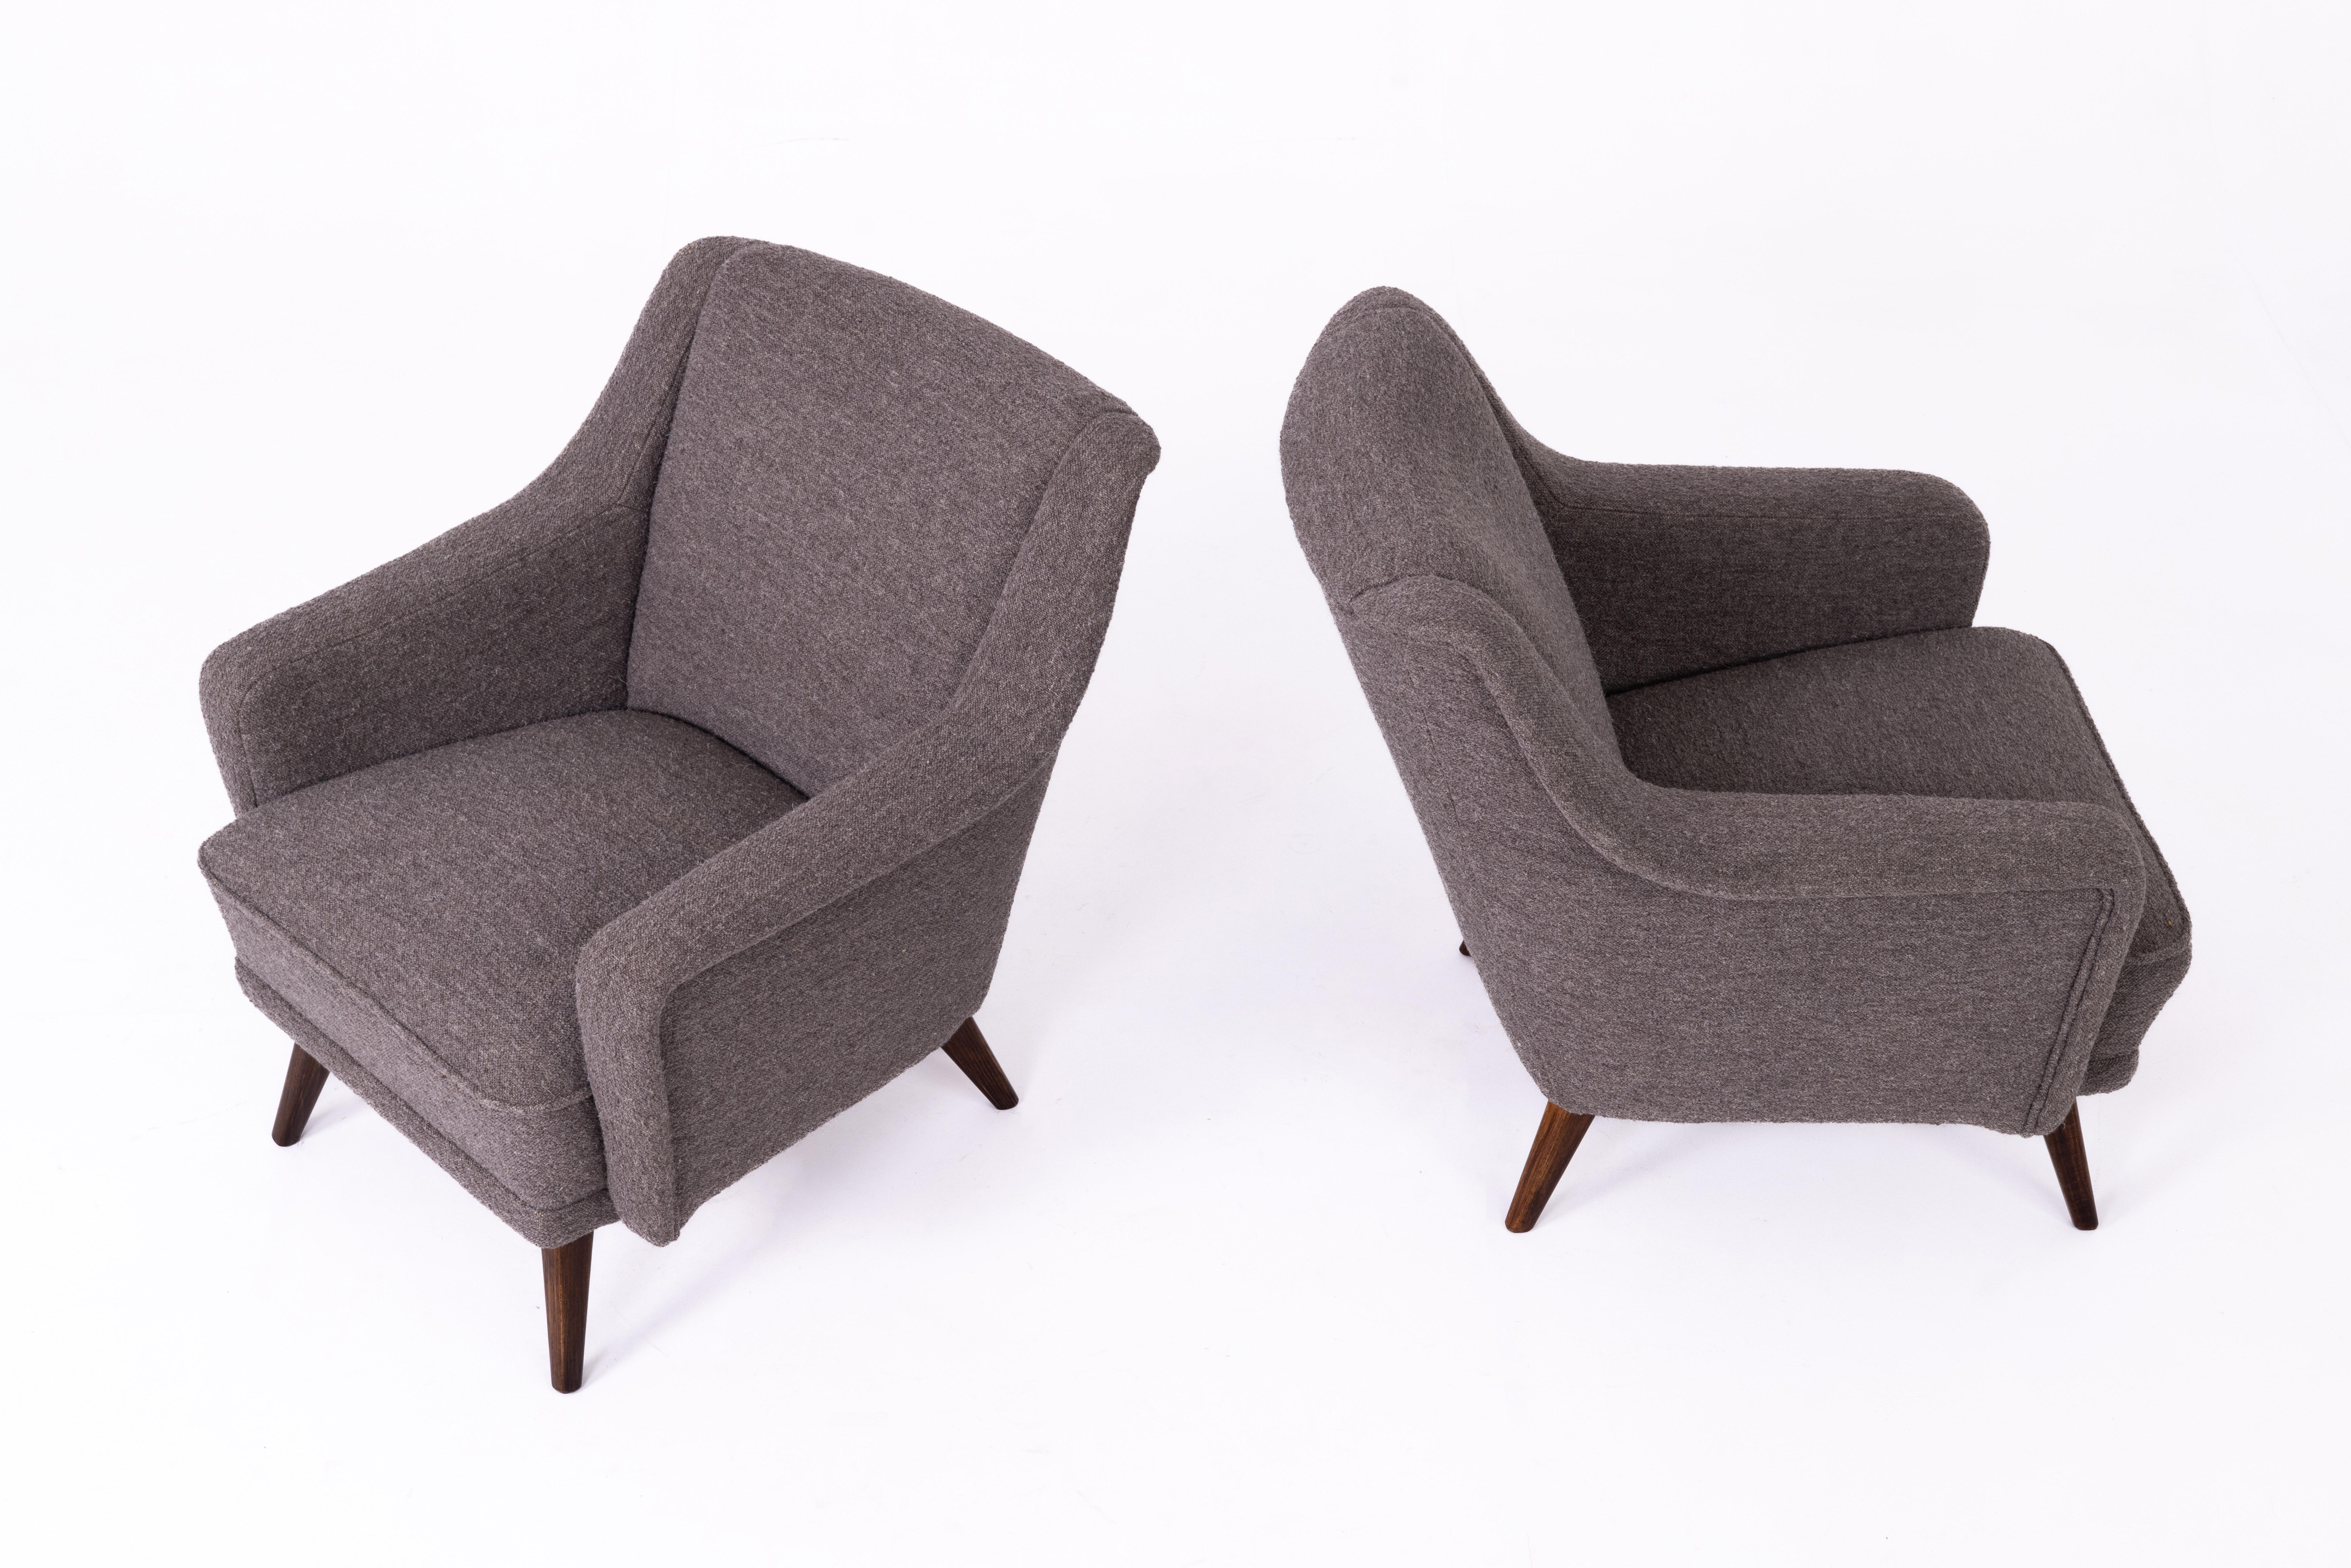 Austrian Pair of Mid-century armchairs, Austria 1950s, Newly Reupholstered, Linen Fabric For Sale